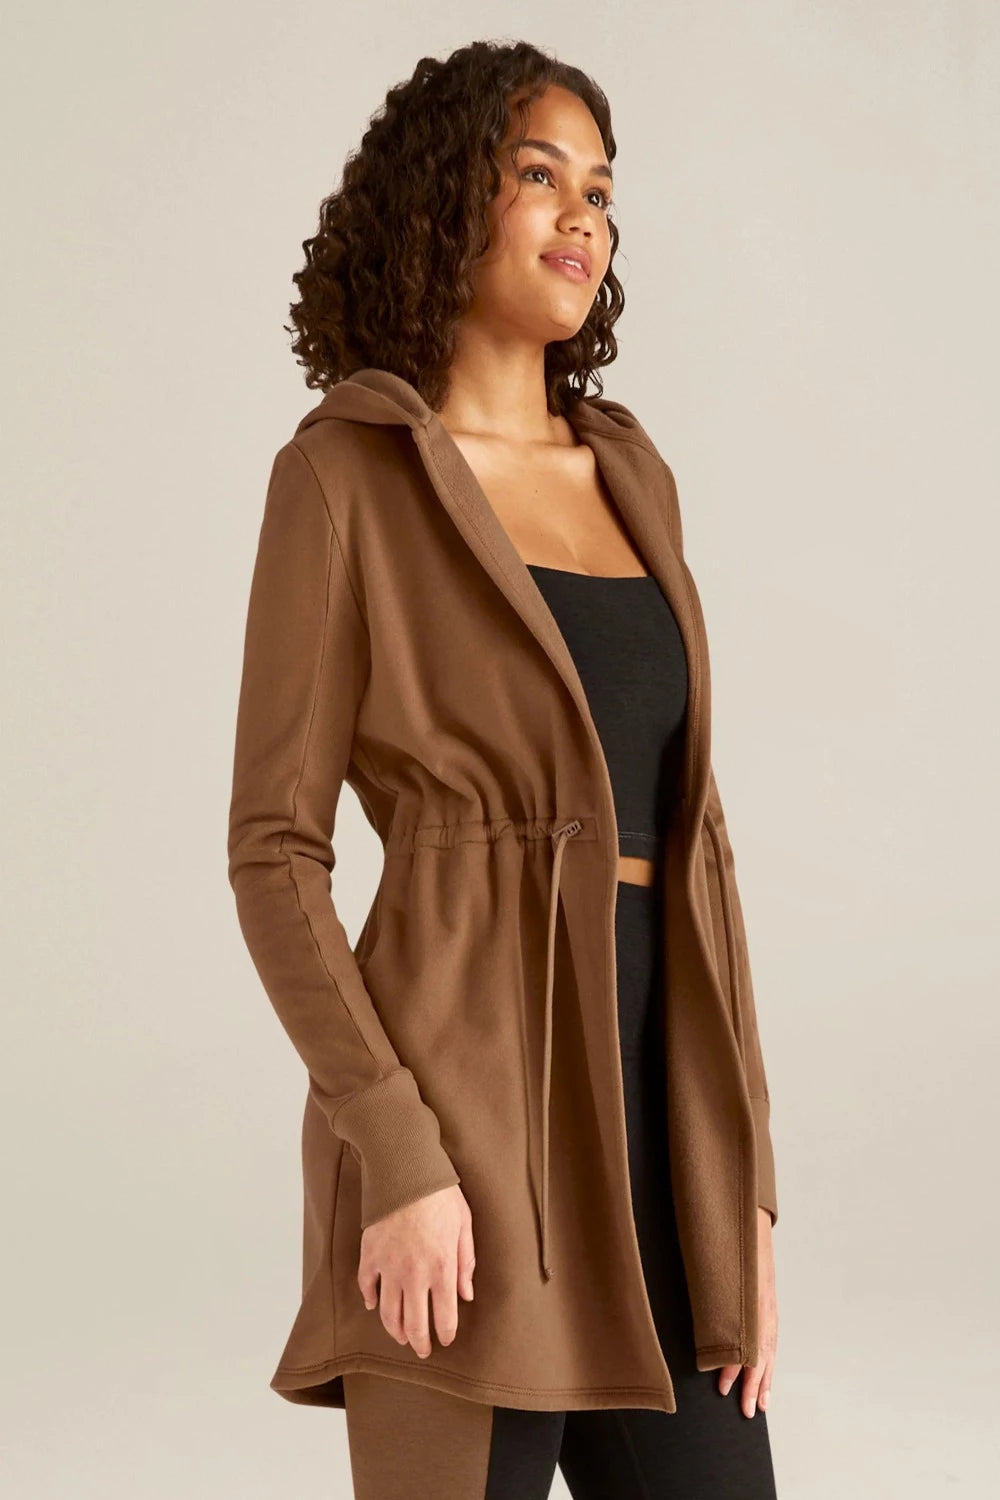 On the Go Jacket in Toffee